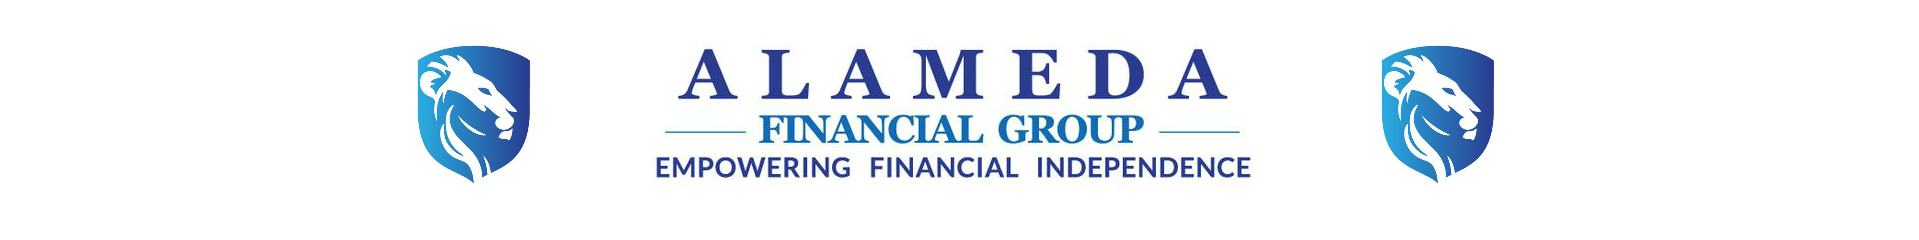 The Alameda Financial Group